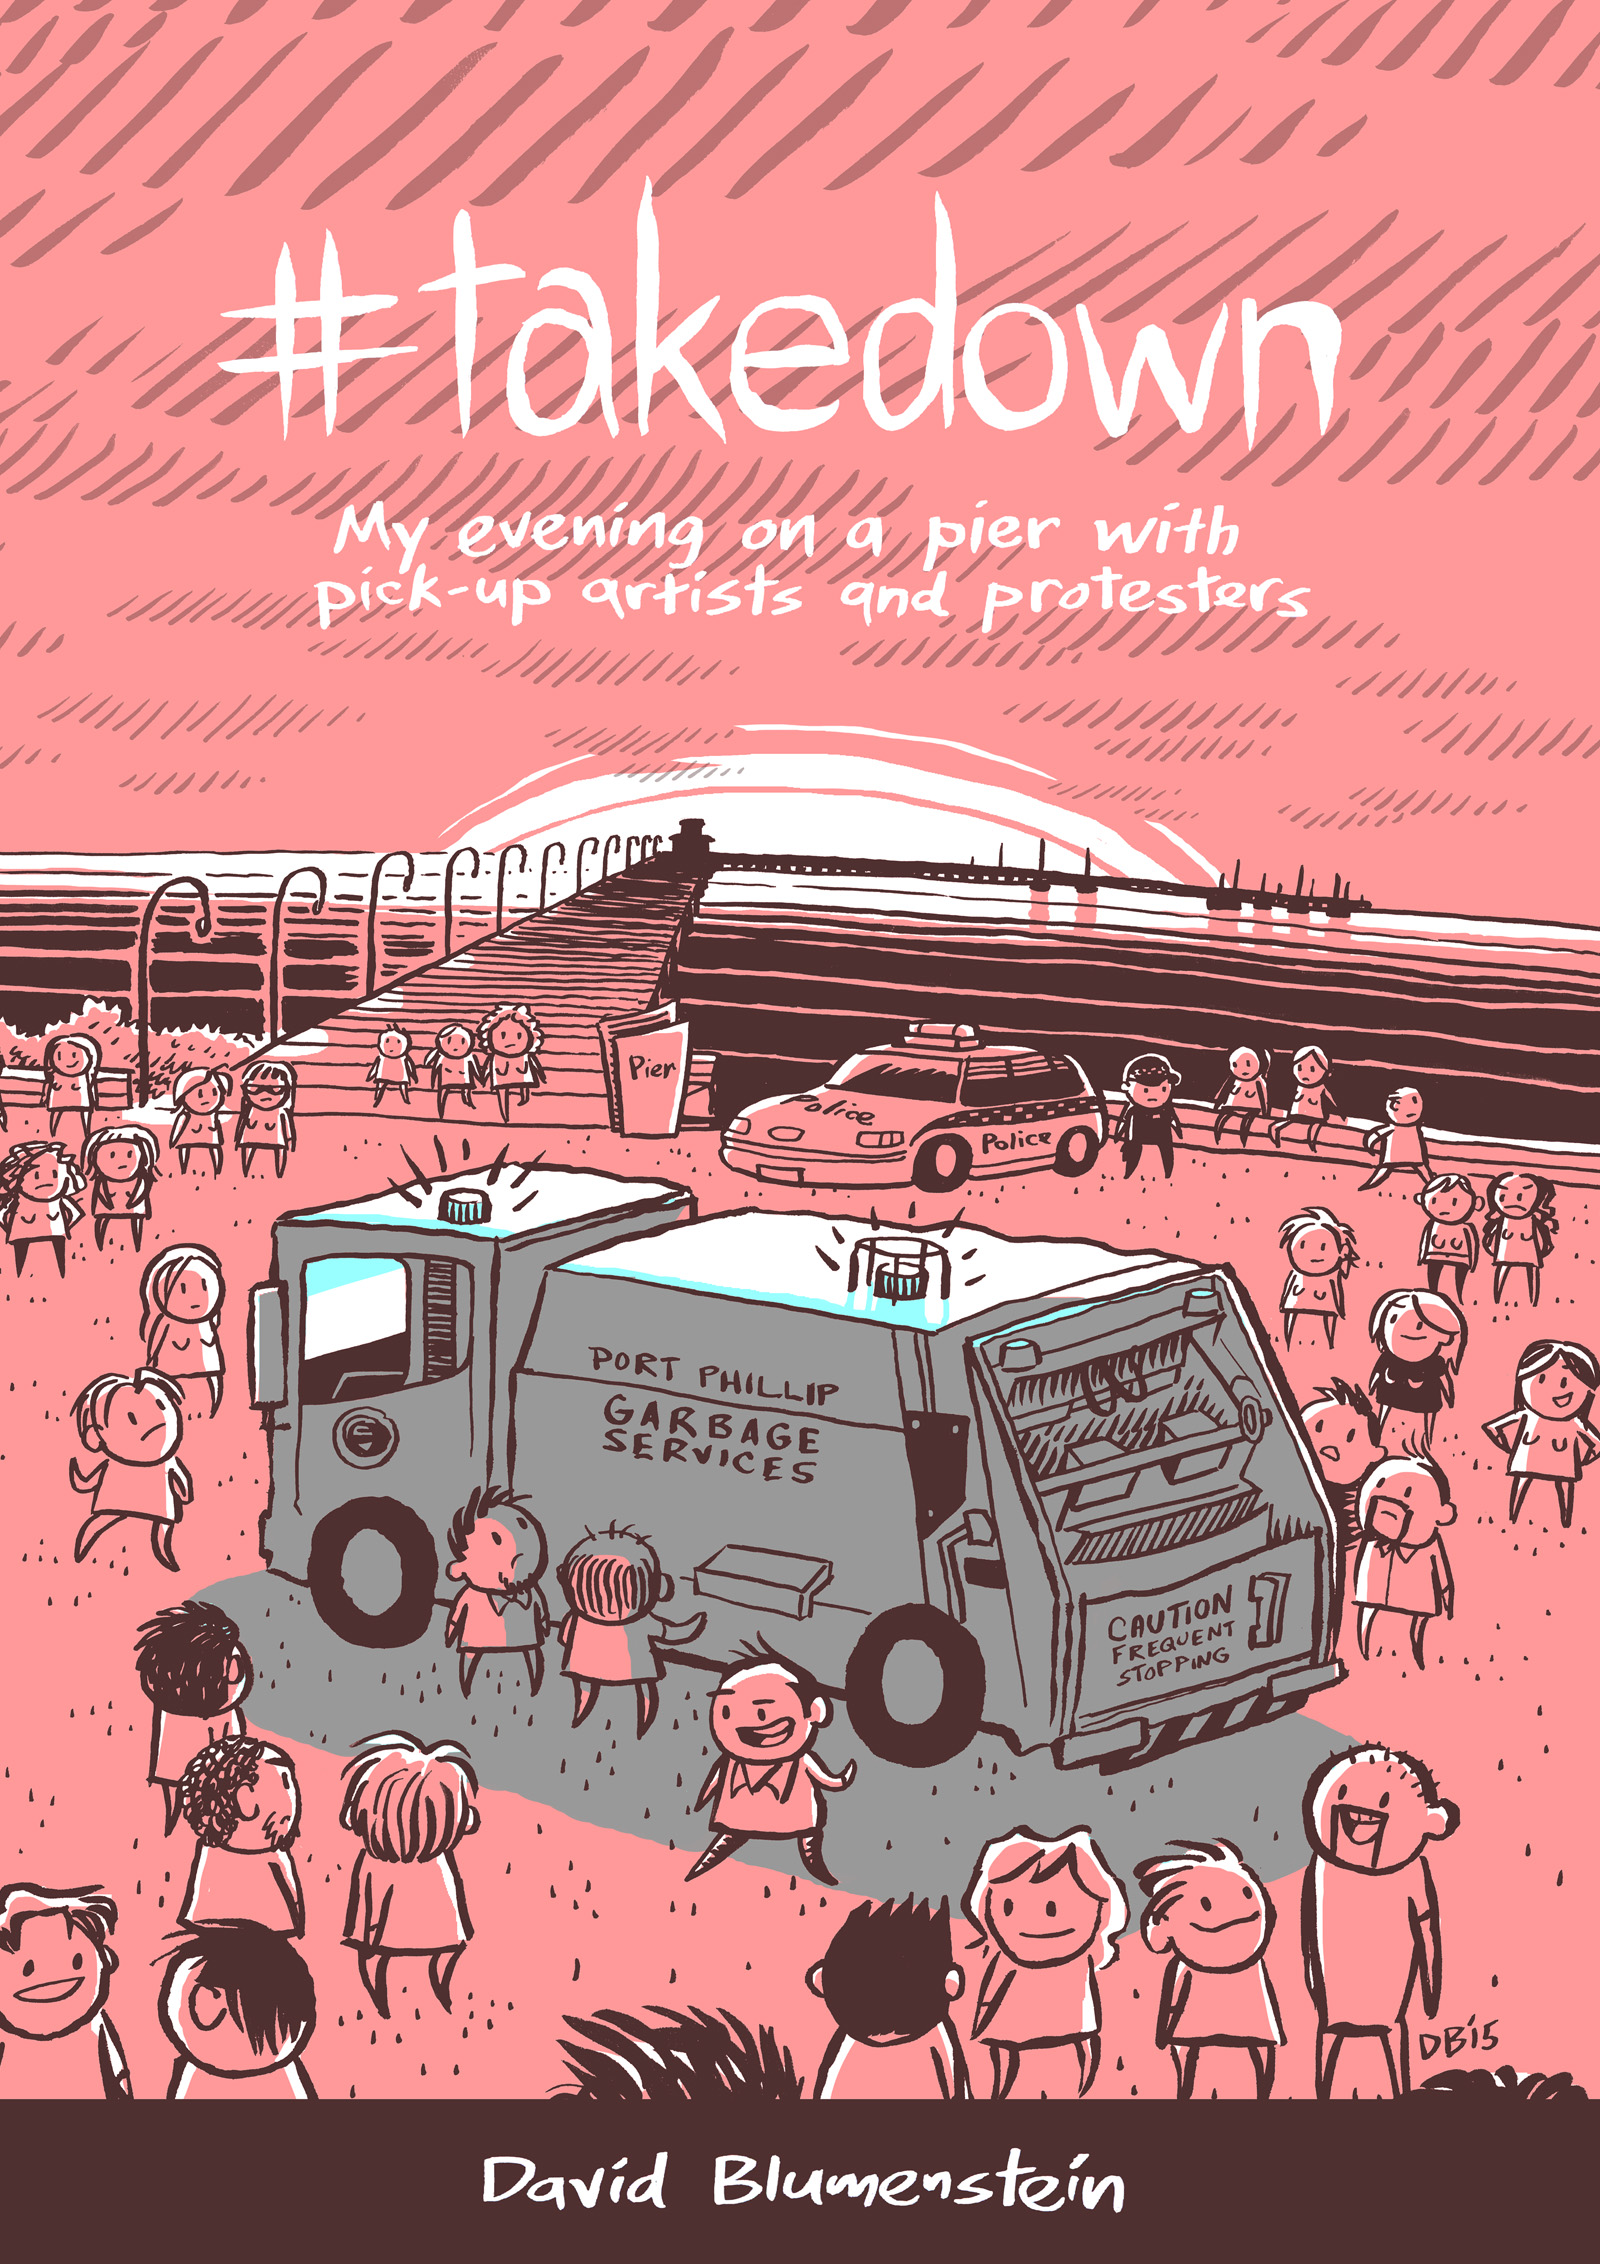 #takedown: My evening on a pier with pick-up artists and protesters